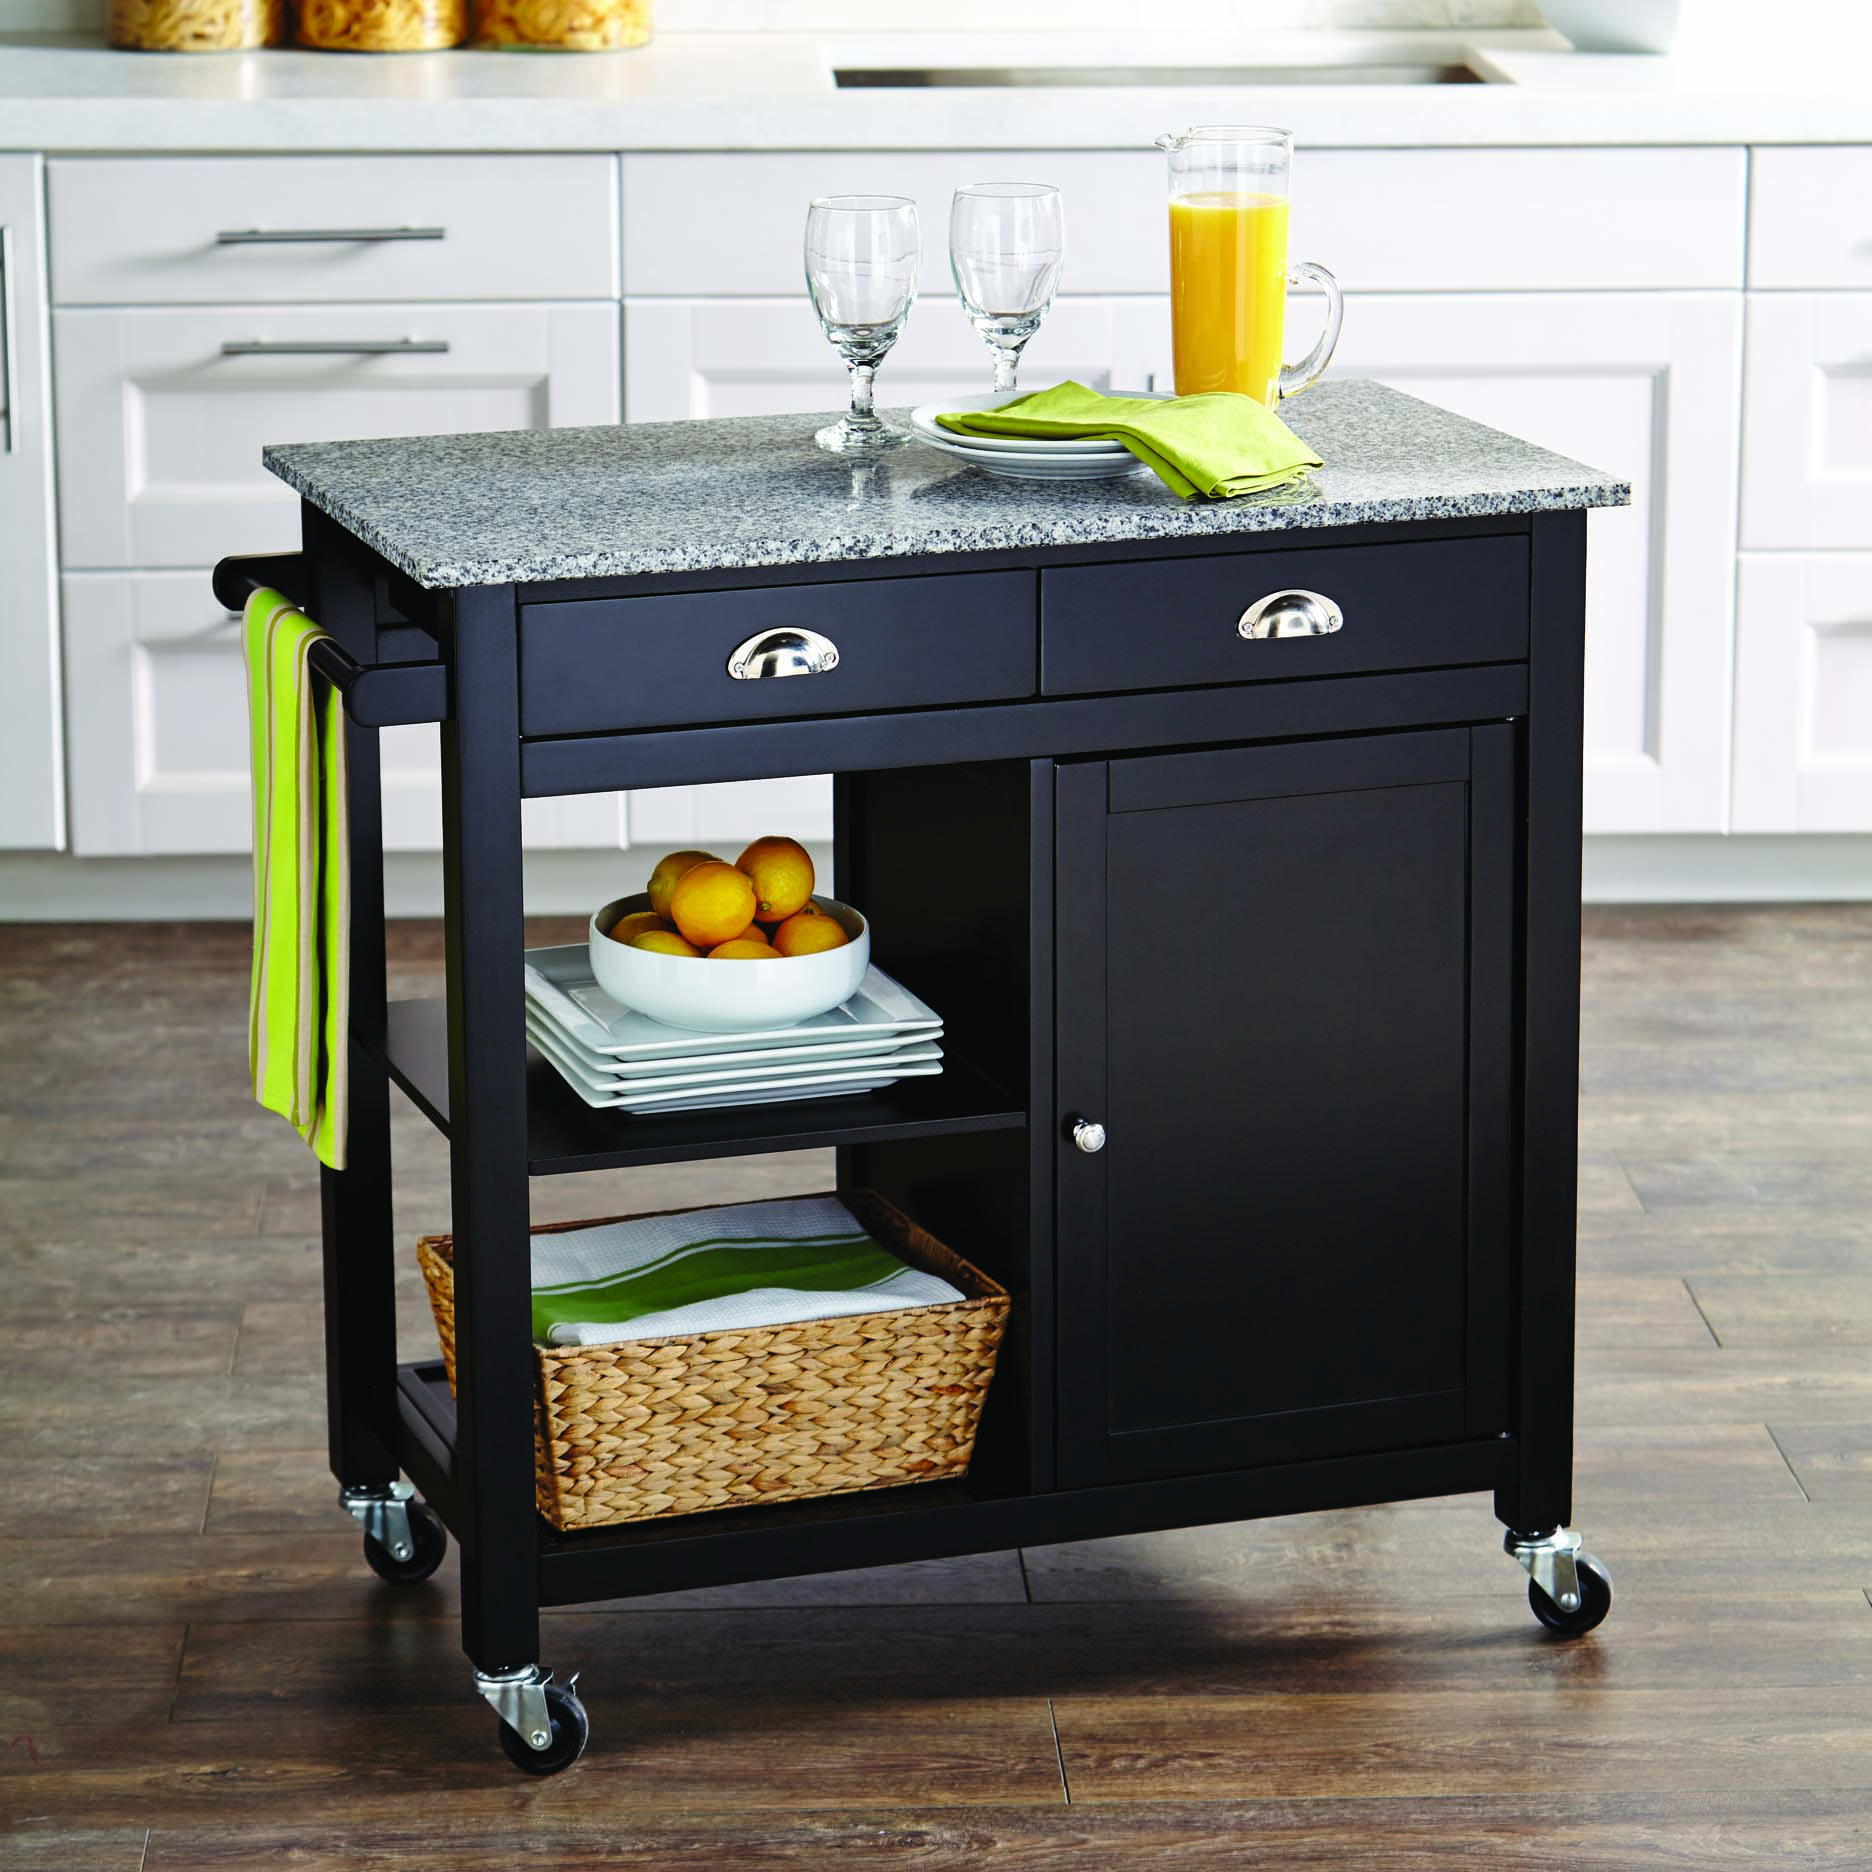 Better Homes & Gardens 35" Tall Rolling Kitchen Cart with Granite Top, Black - image 1 of 8